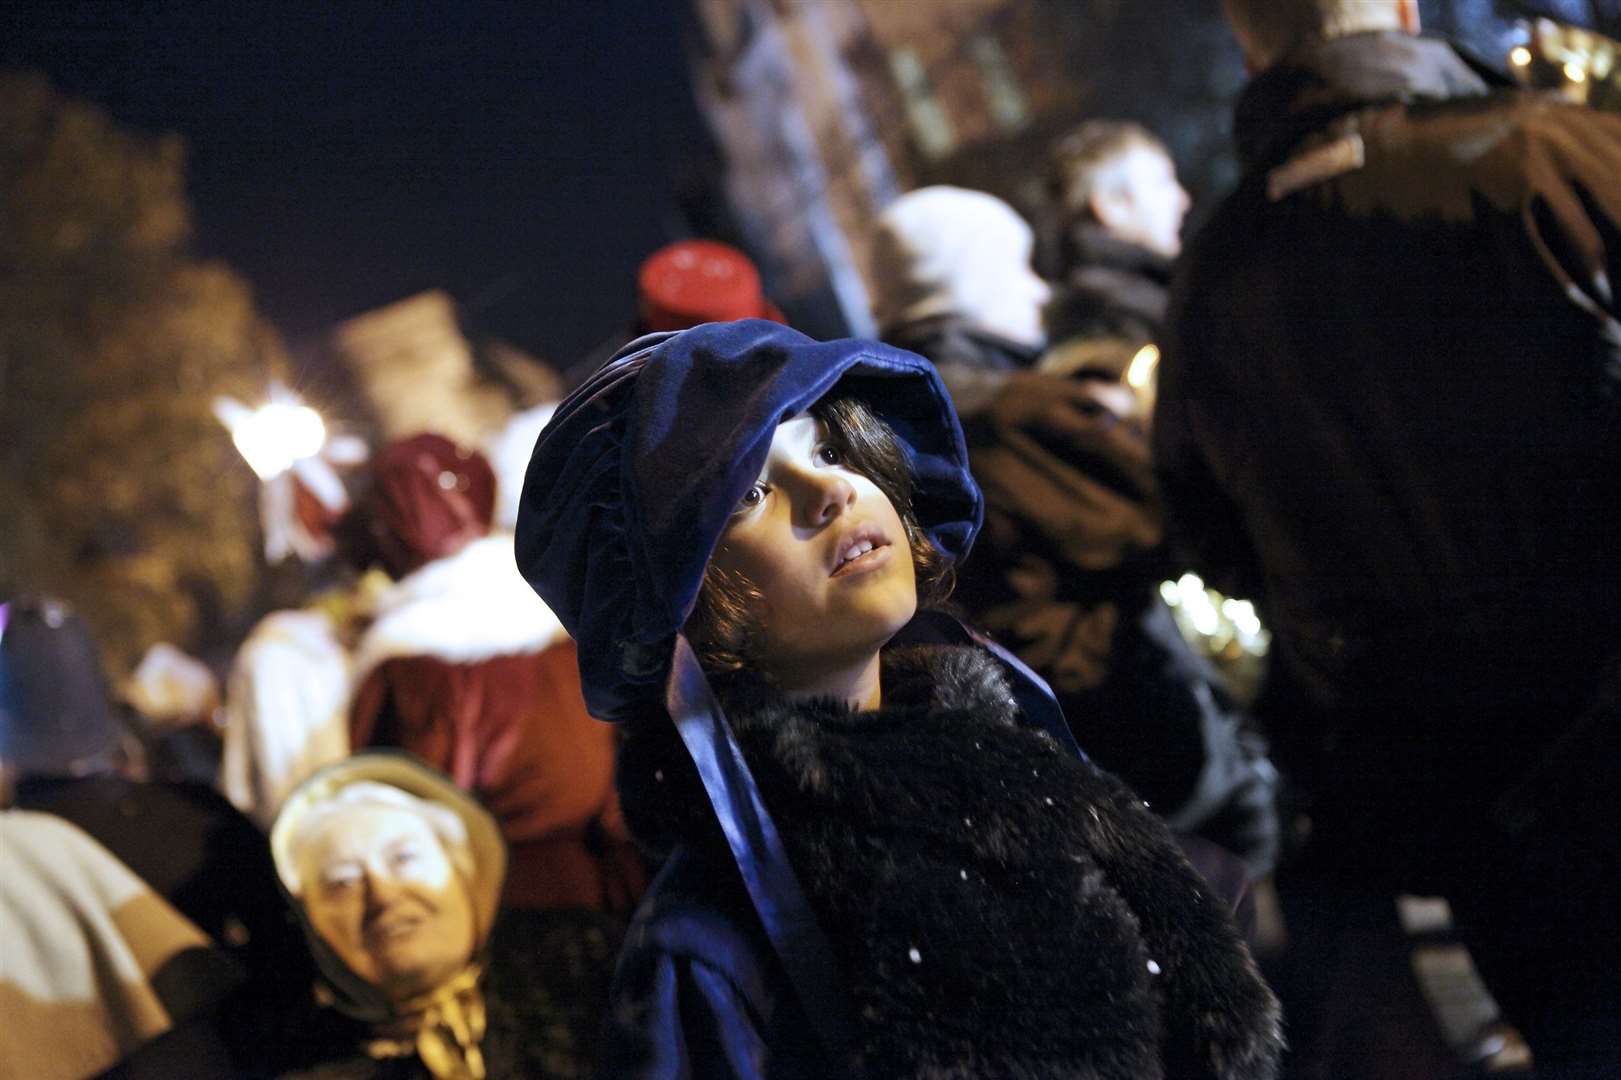 A Dickensian Christmas sees costumed characters in the streets of Rochester Picture: Medway Council